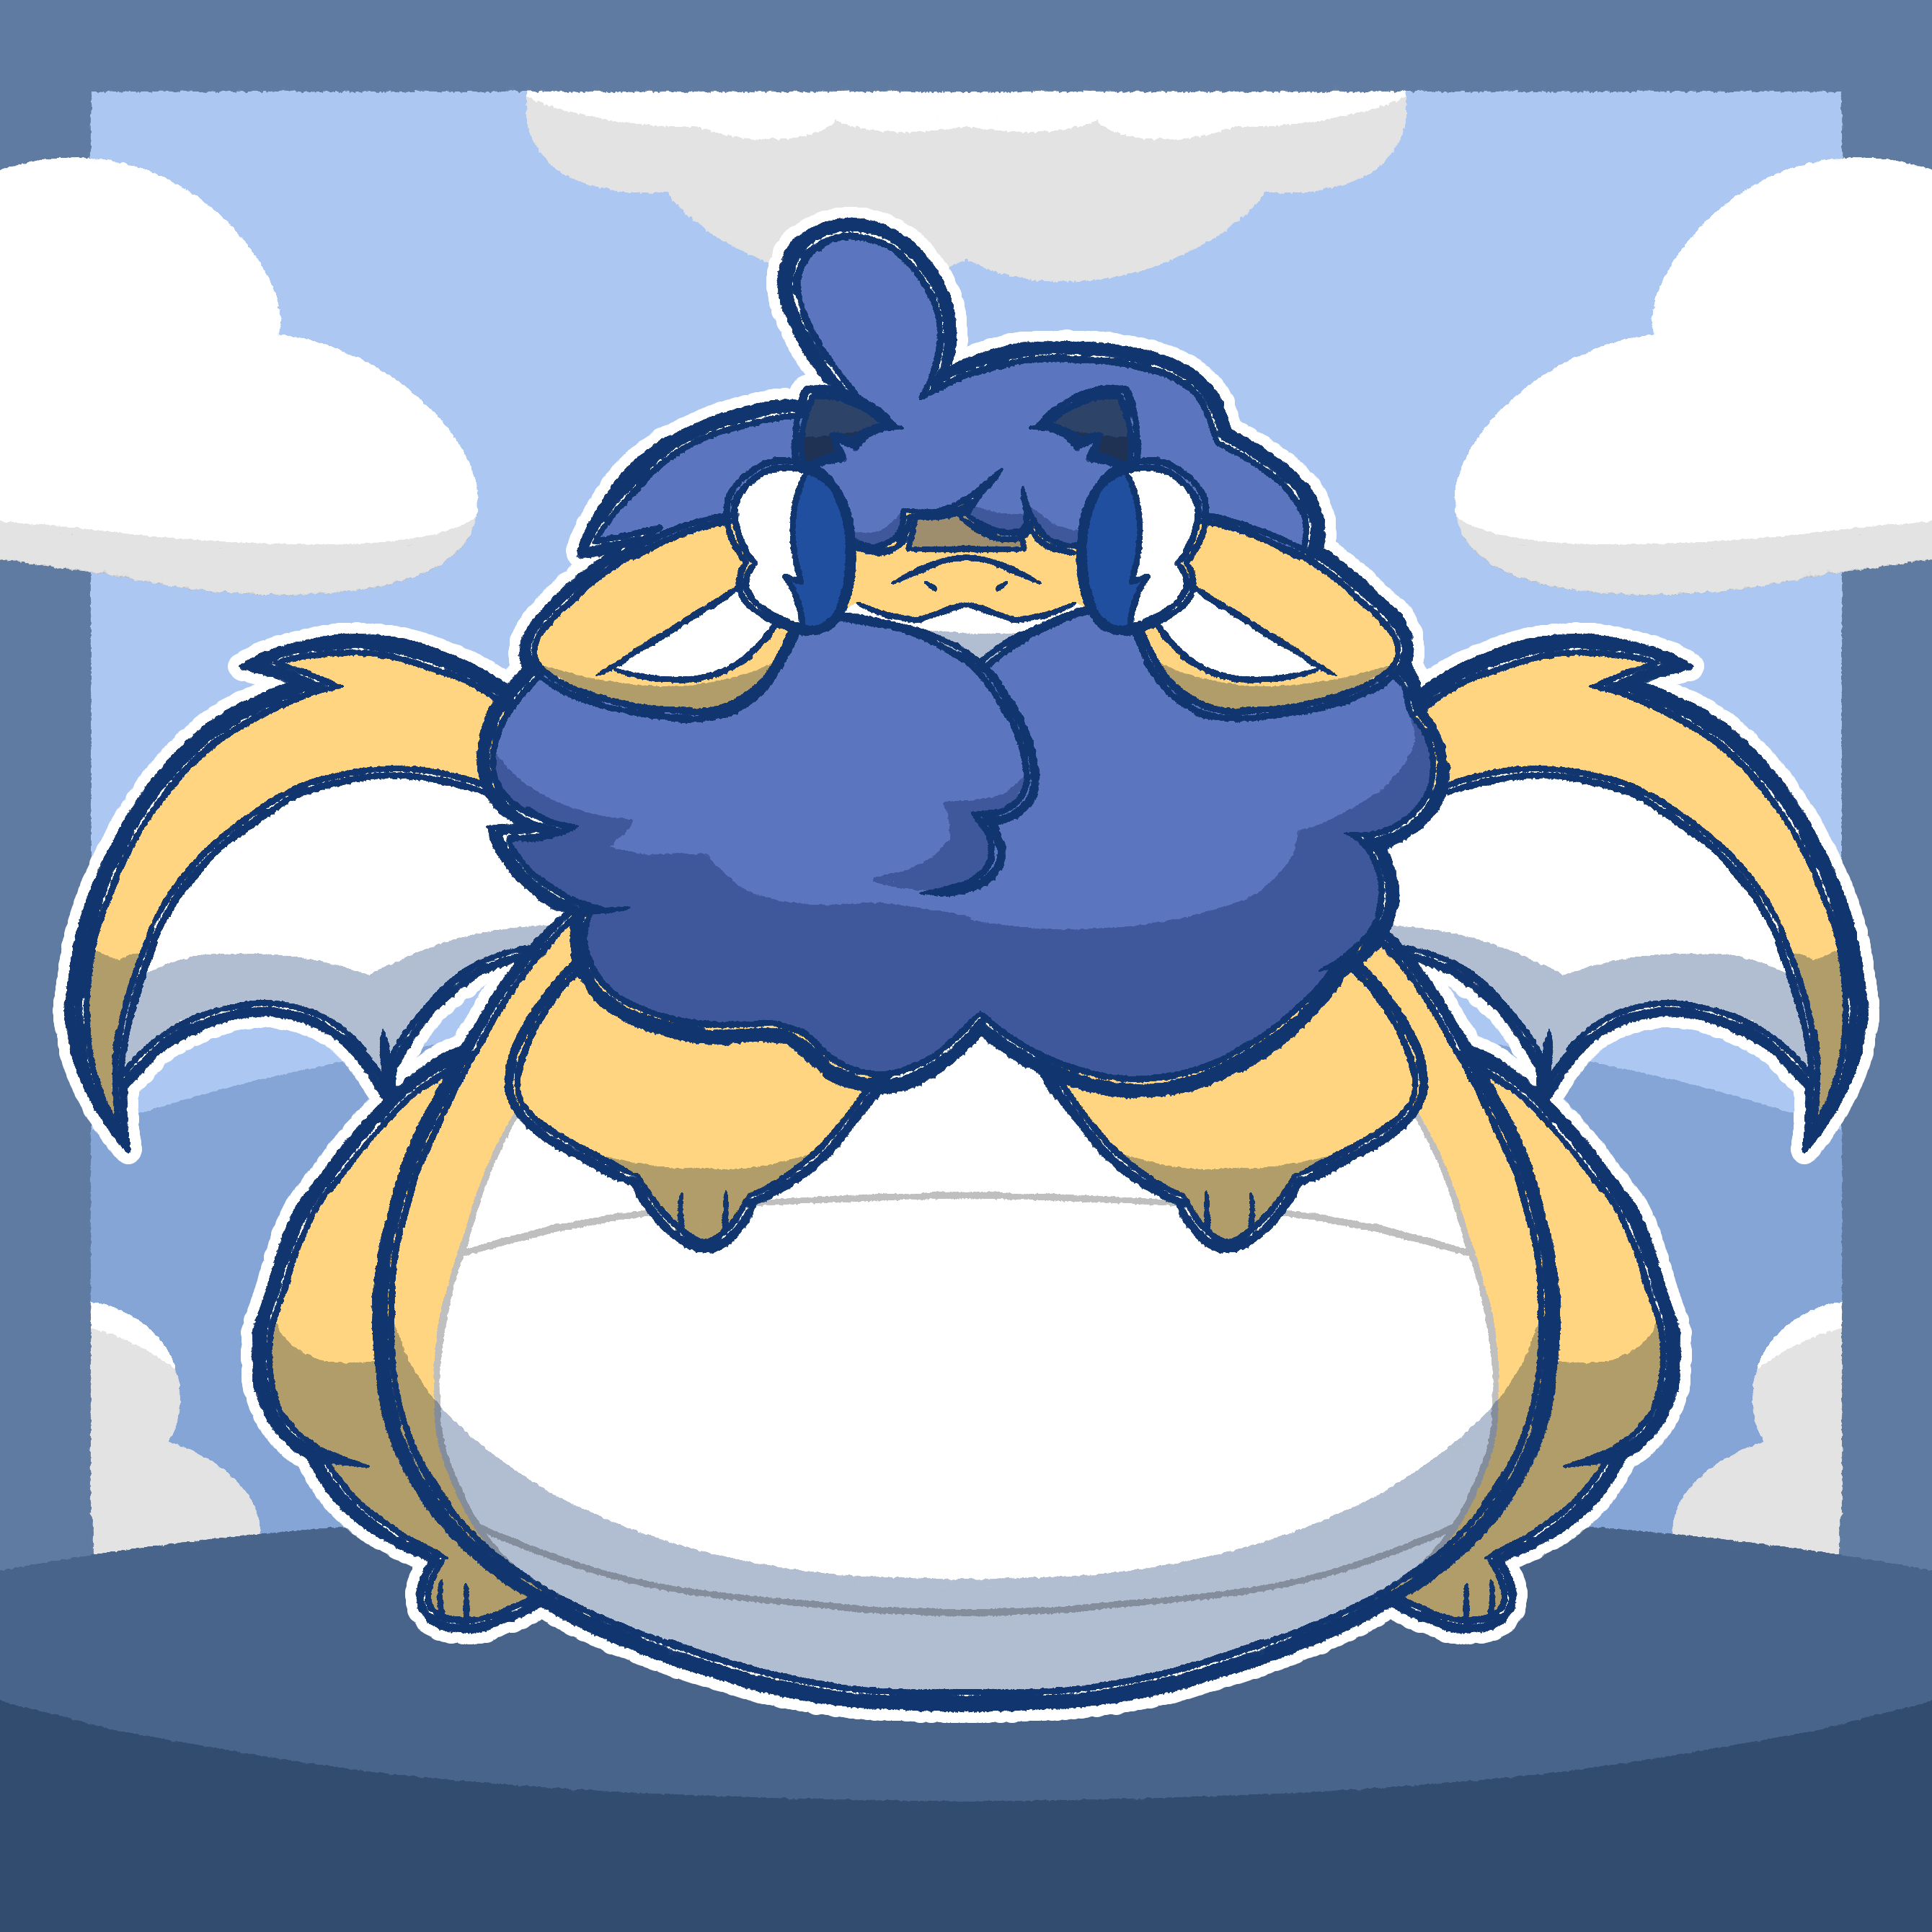 Drawing of a chubby dragon with a fluffy, soft blue mane; white underbelly; heart shaped eyes; floppy, long ears; and stubby little horns, standing in their back legs.